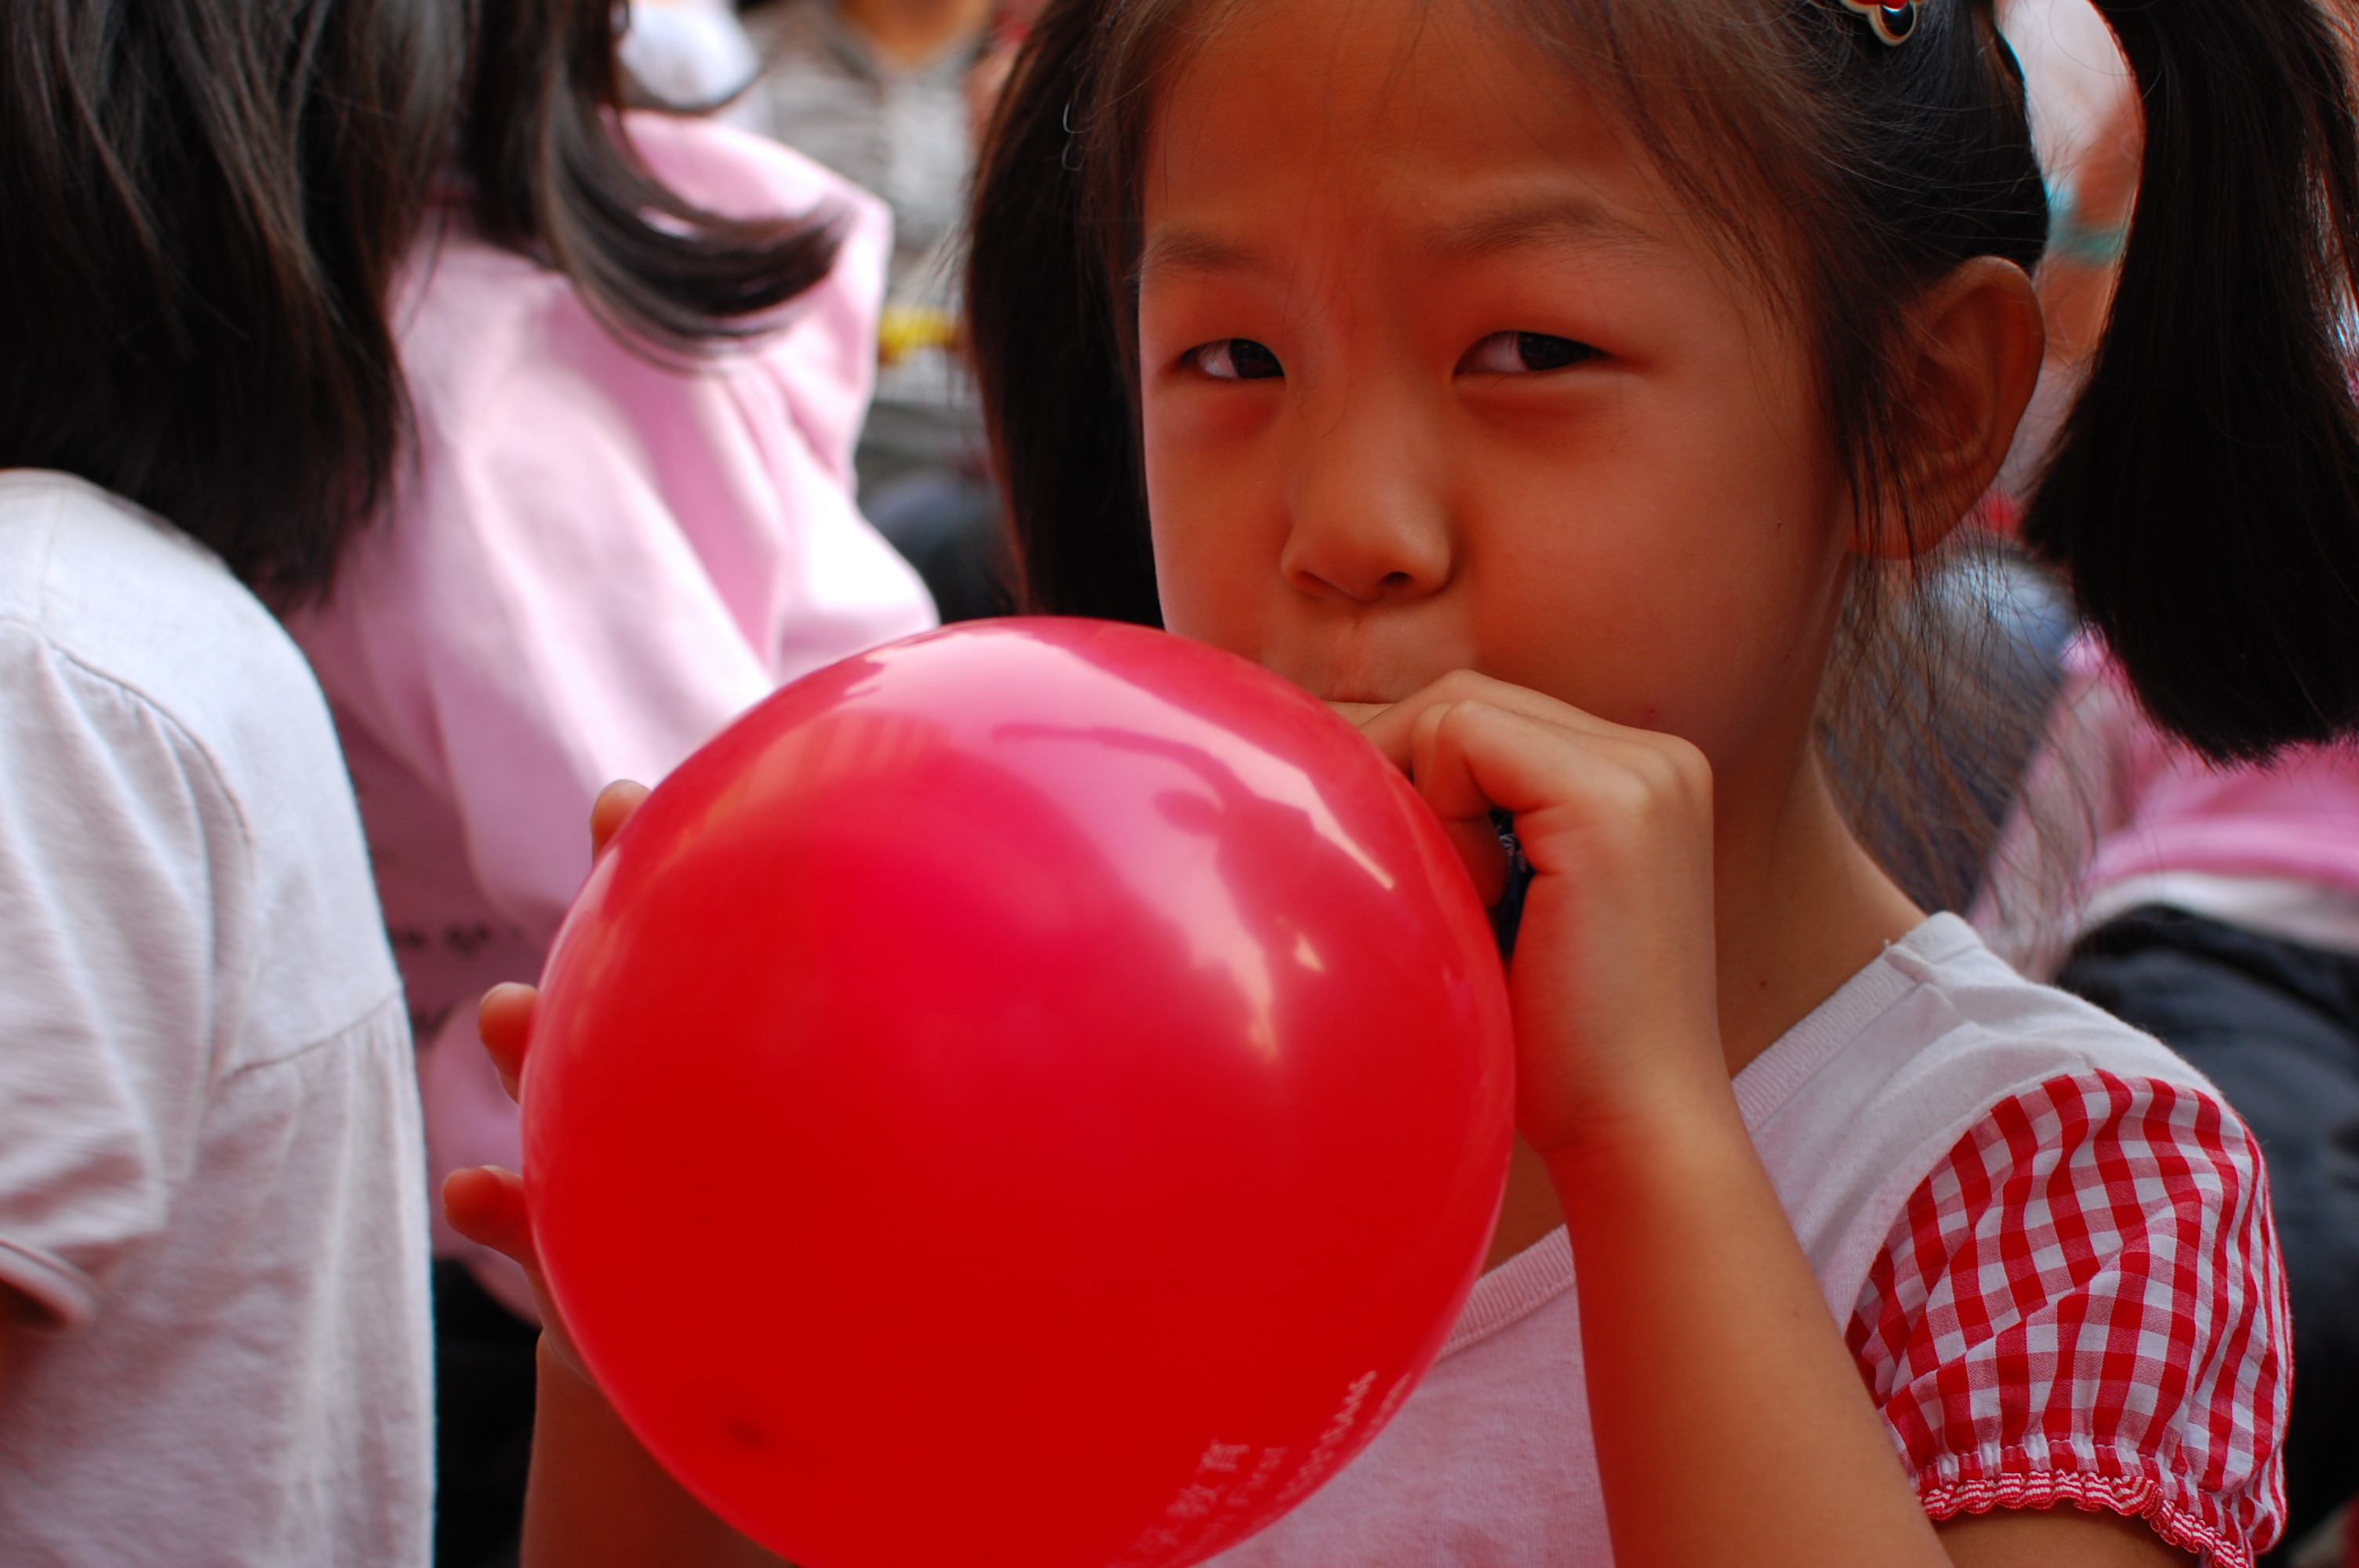 Girl_inflating_a_red_balloon